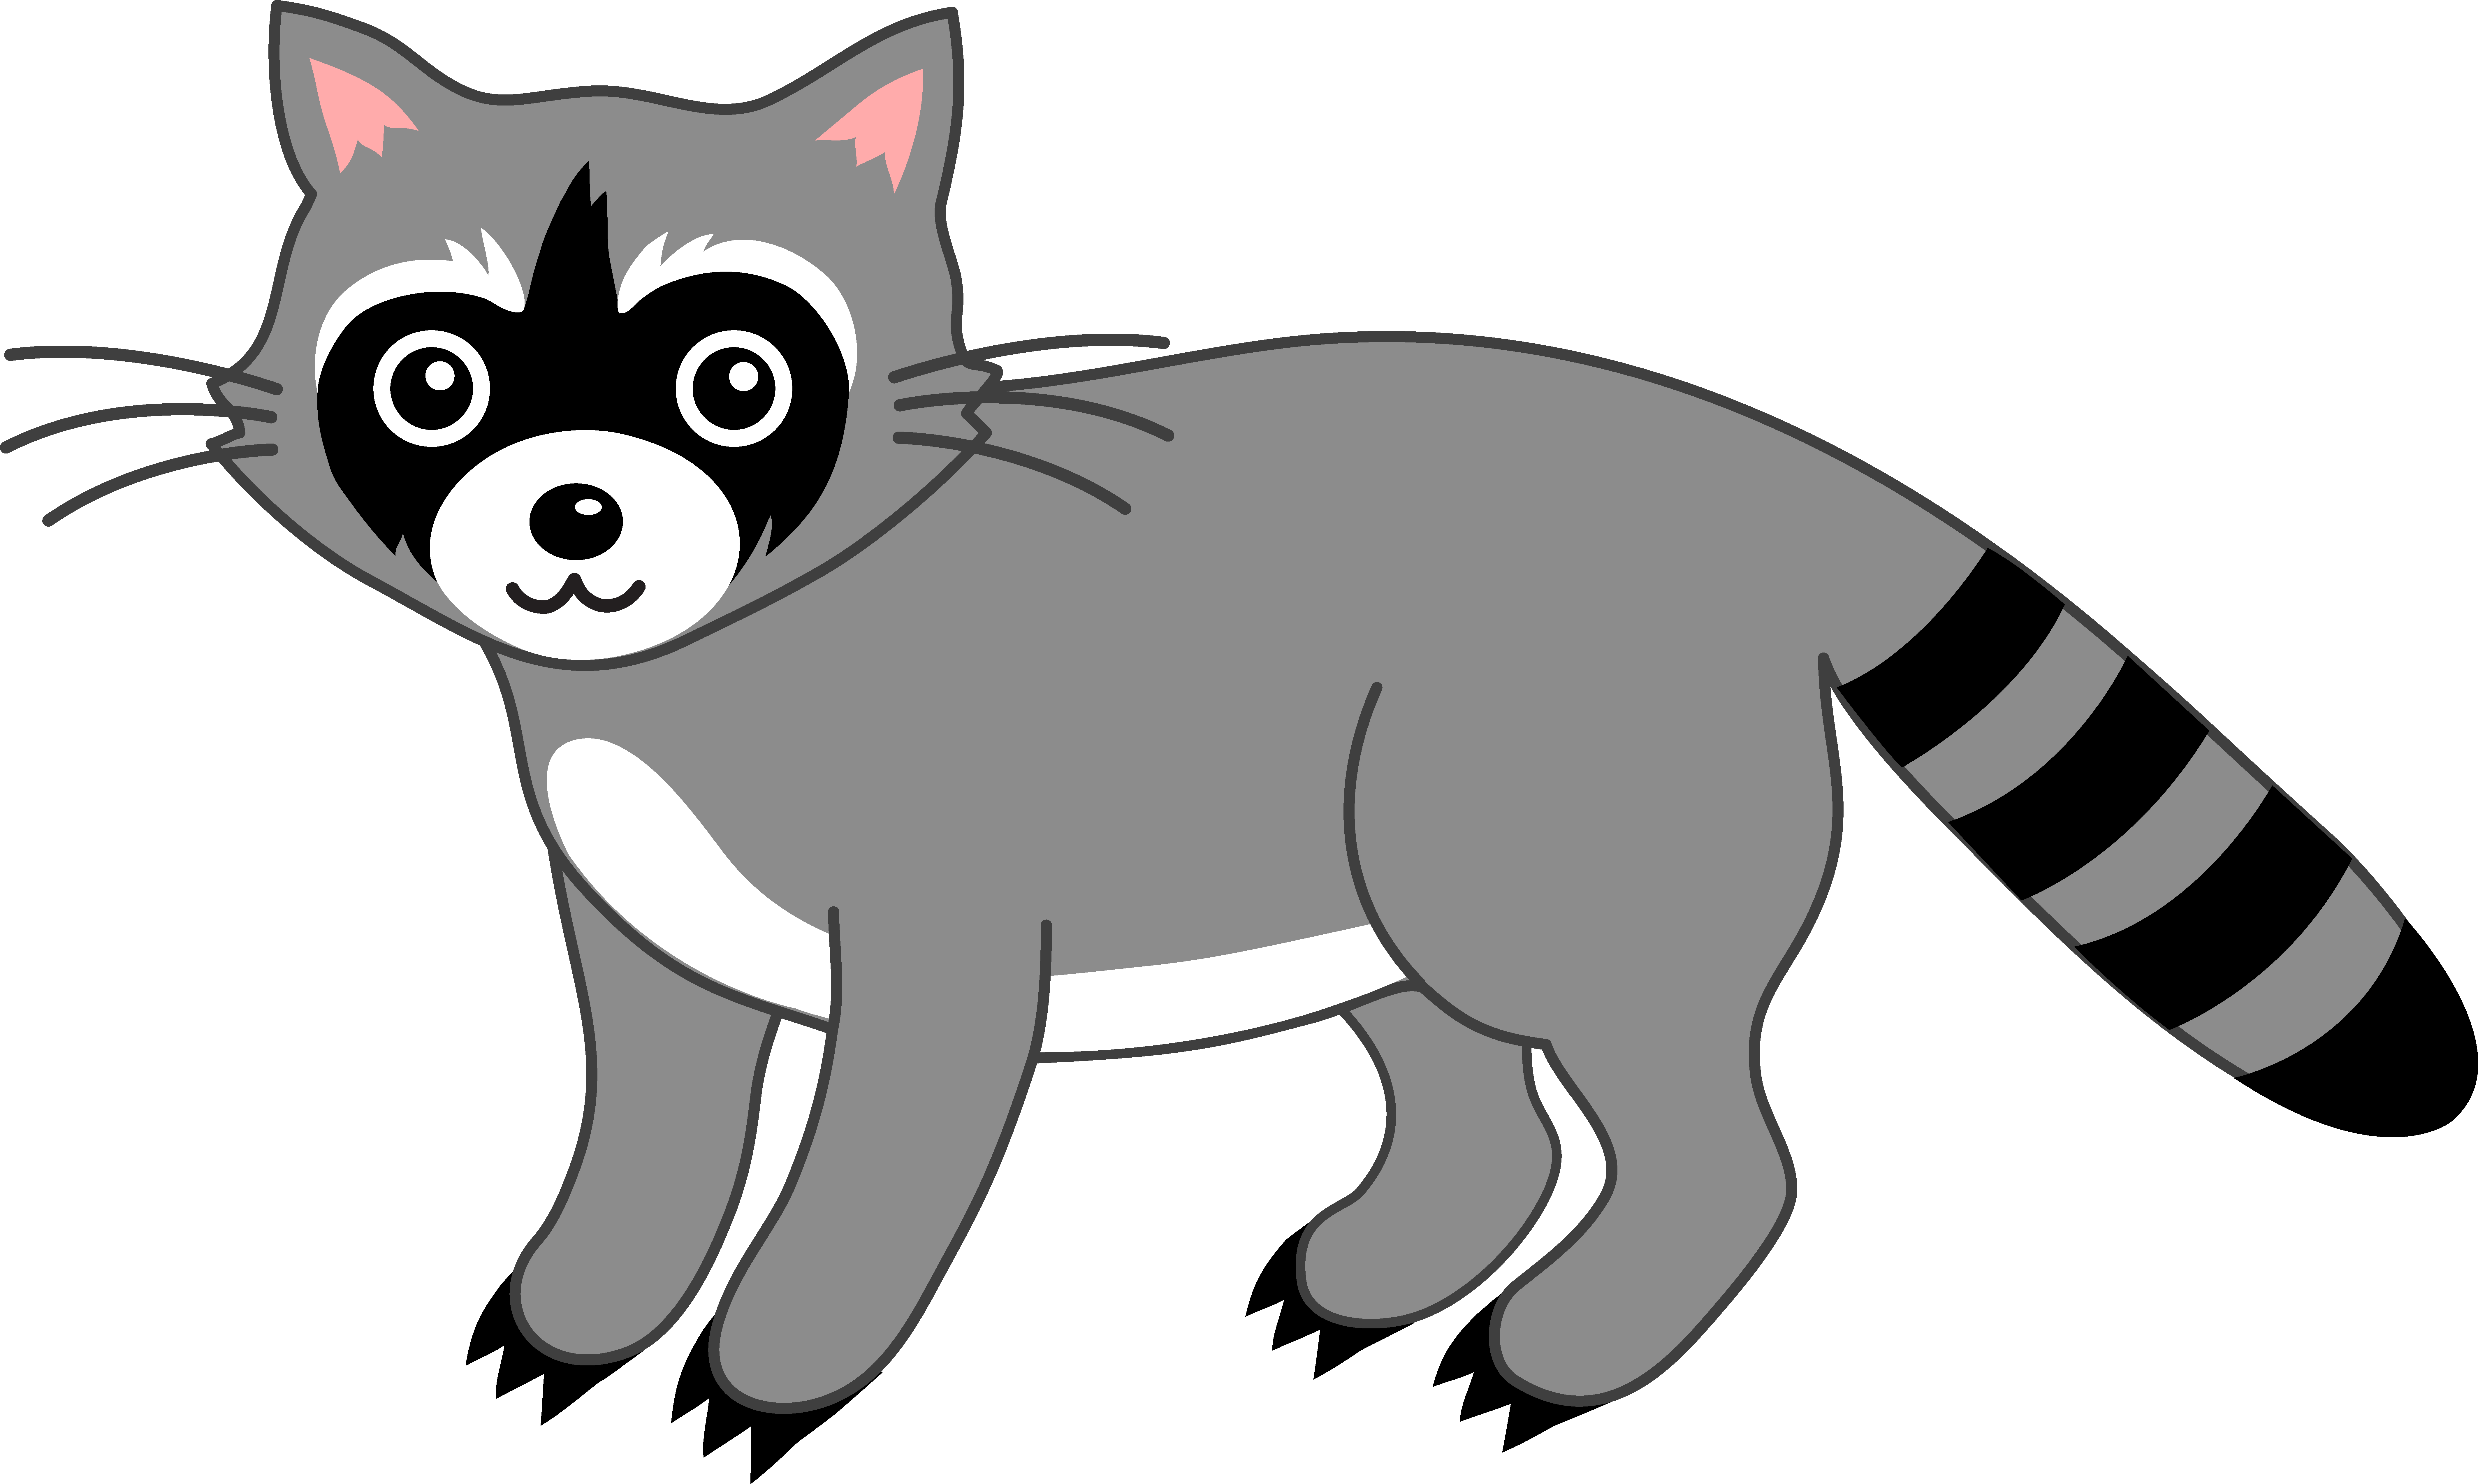 Raccoon clipart #17, Download drawings